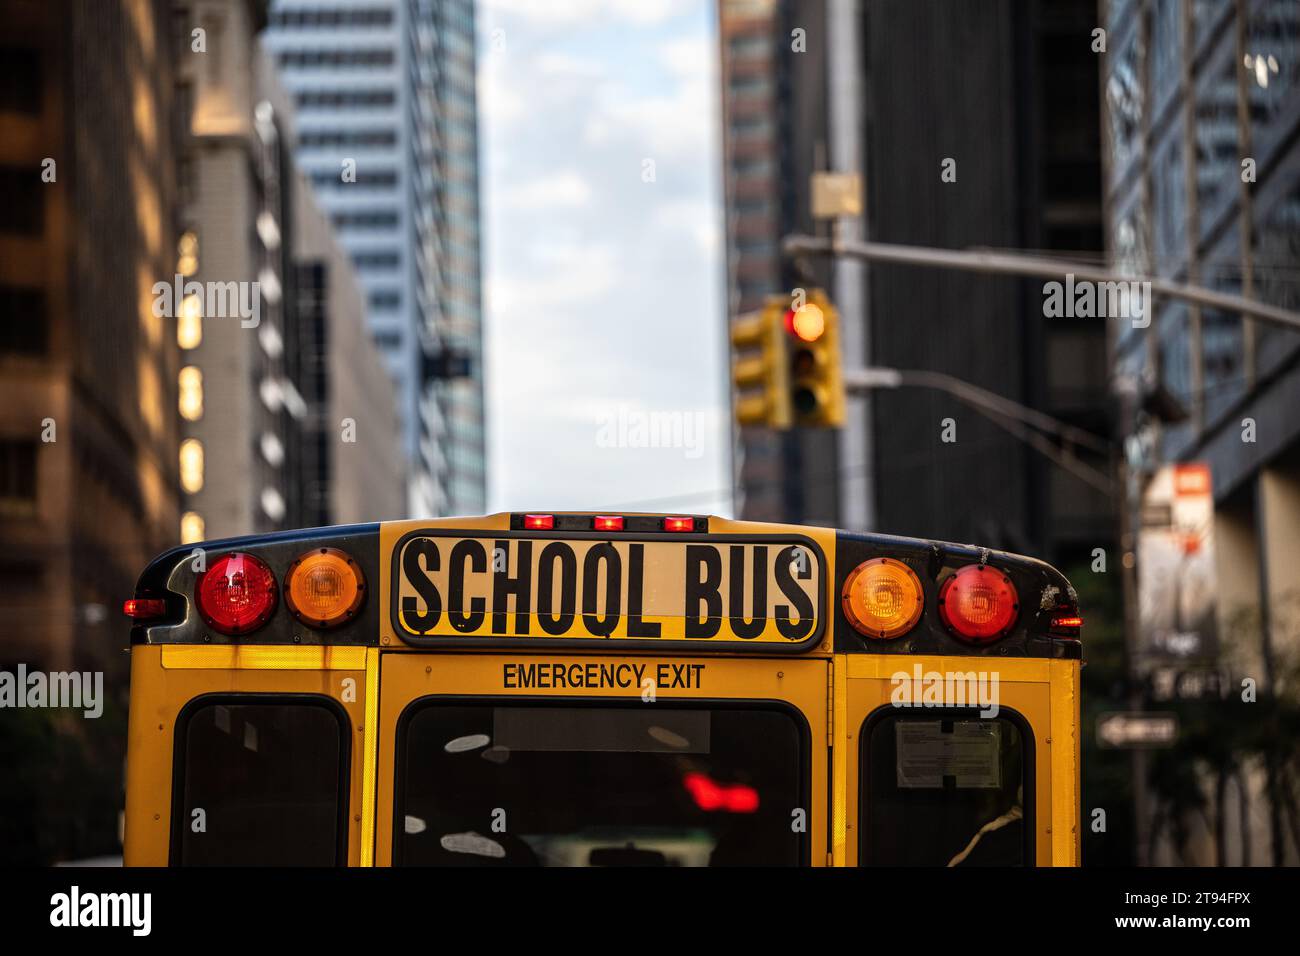 Image of a School Bus on the streets of New York. Stock Photo